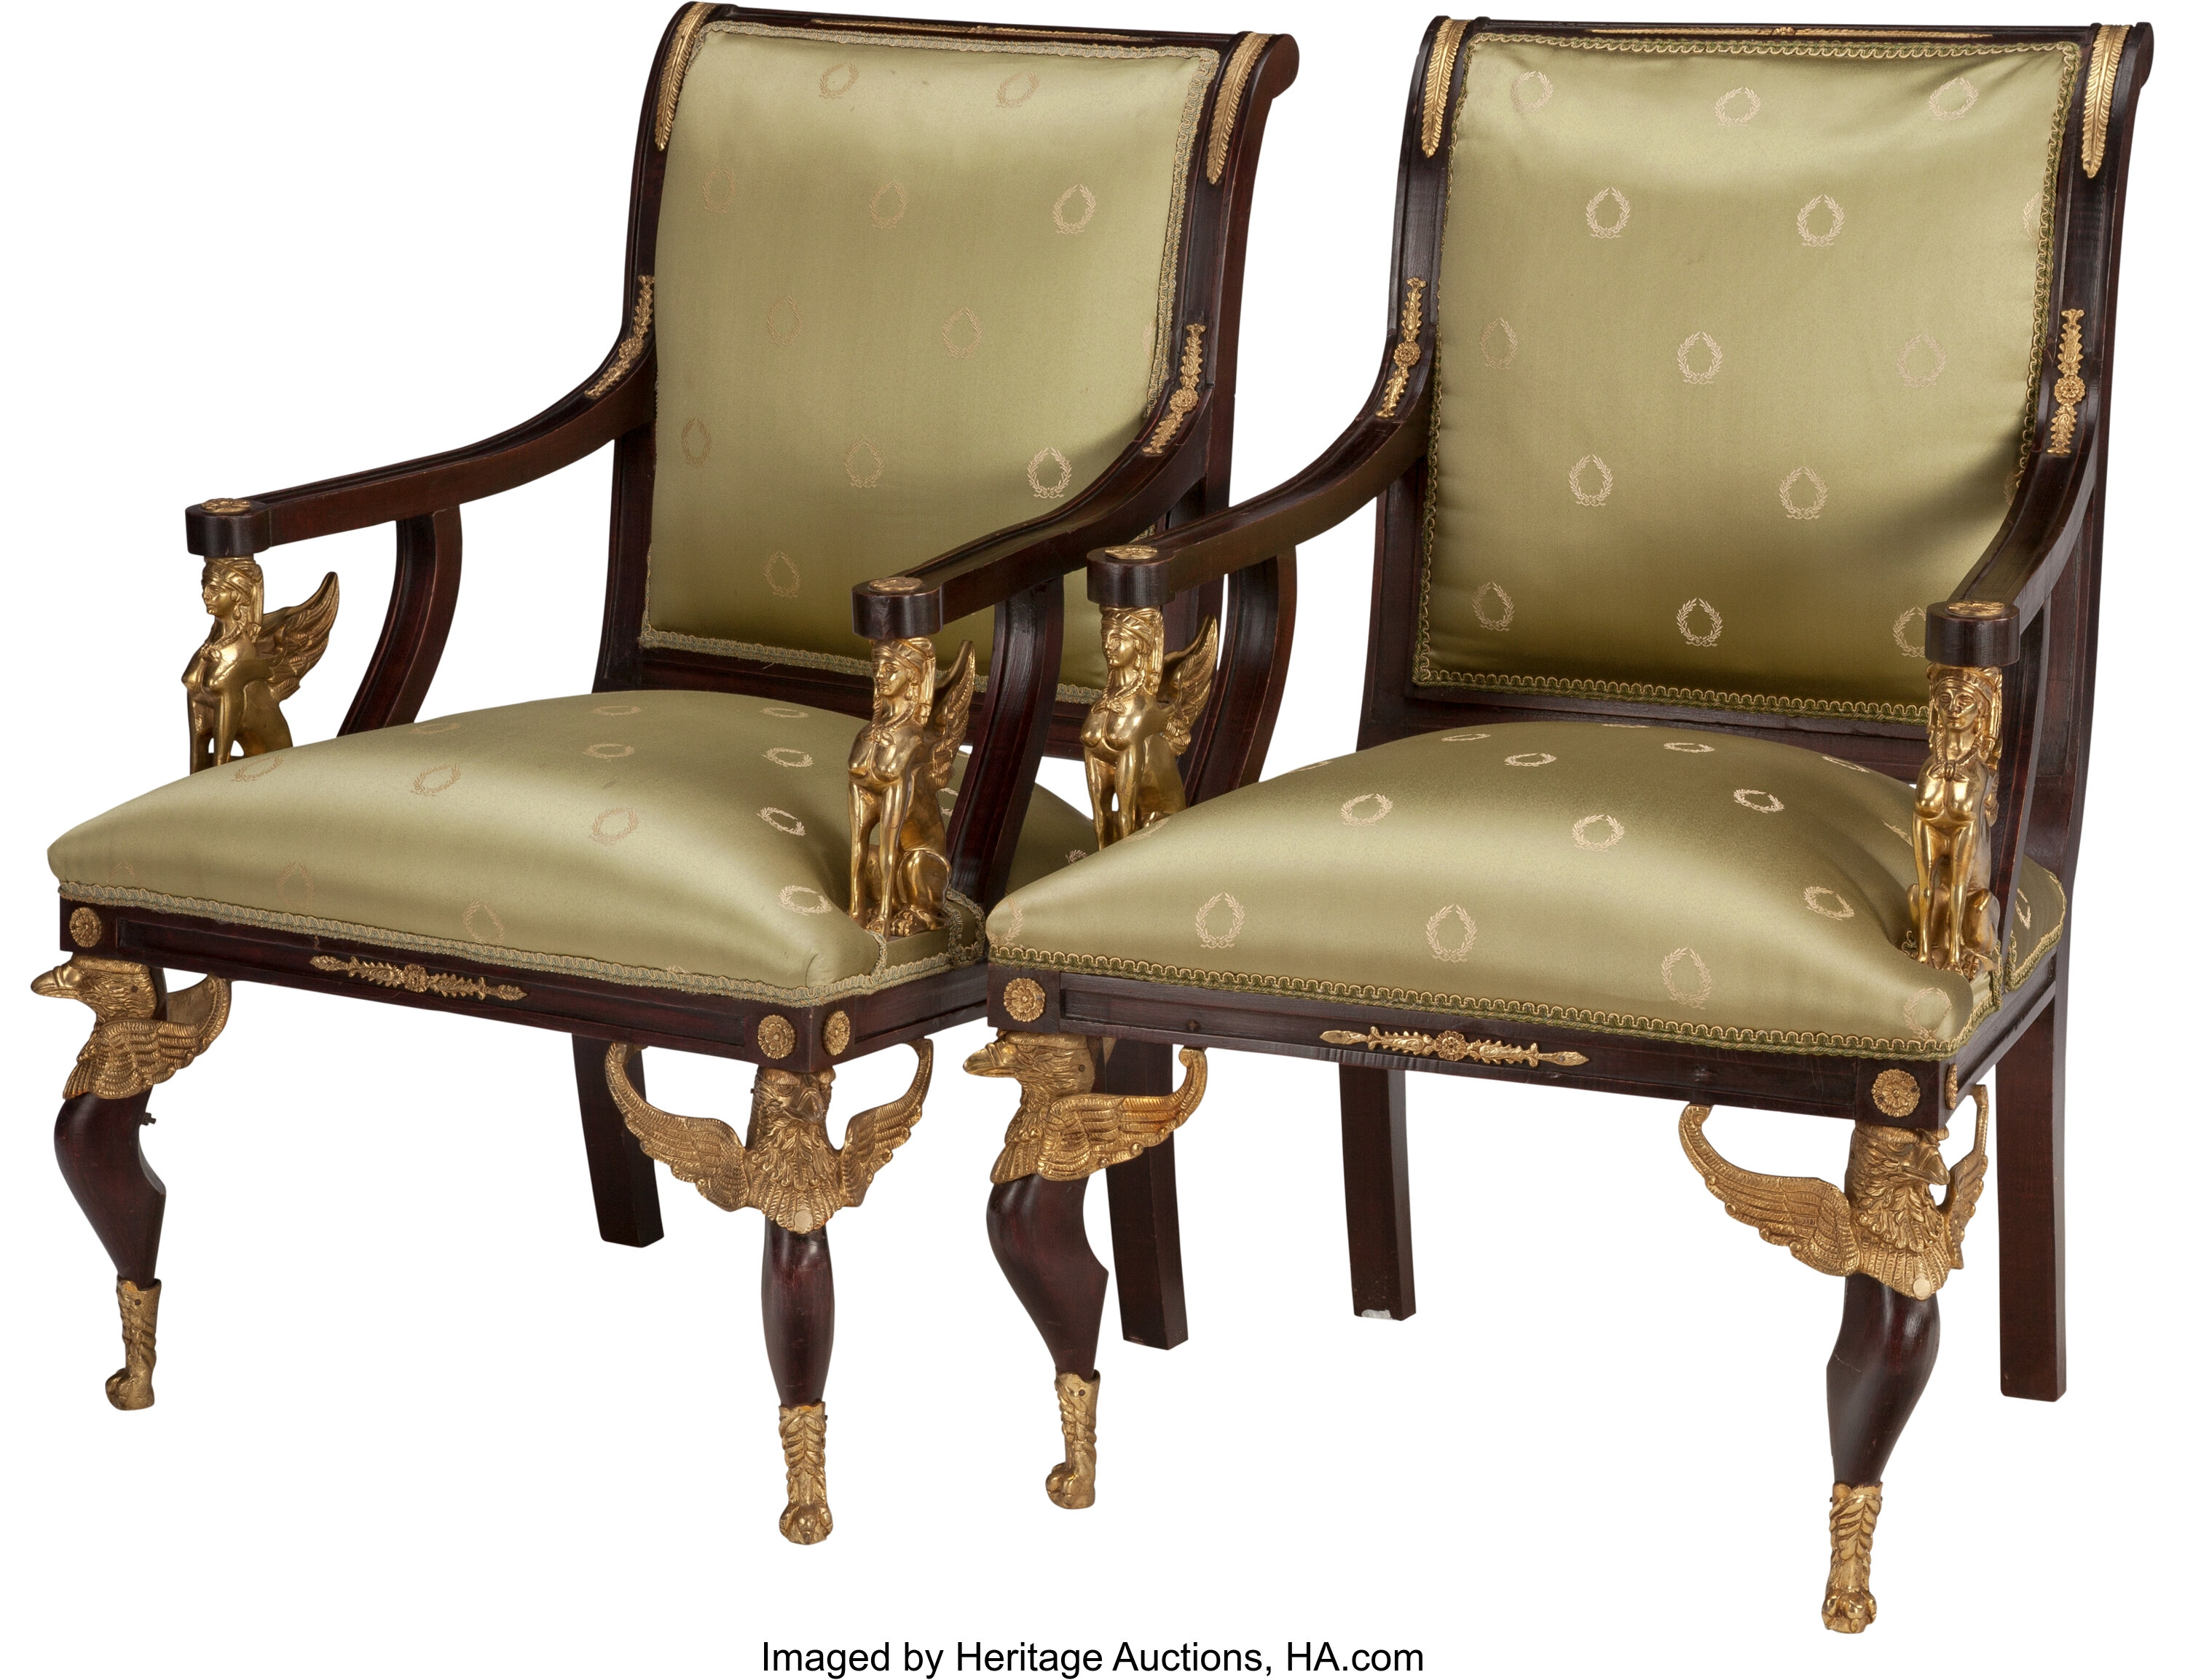 A Pair Of Empire Style Upholstered Mahogany Fauteuils With Gilt